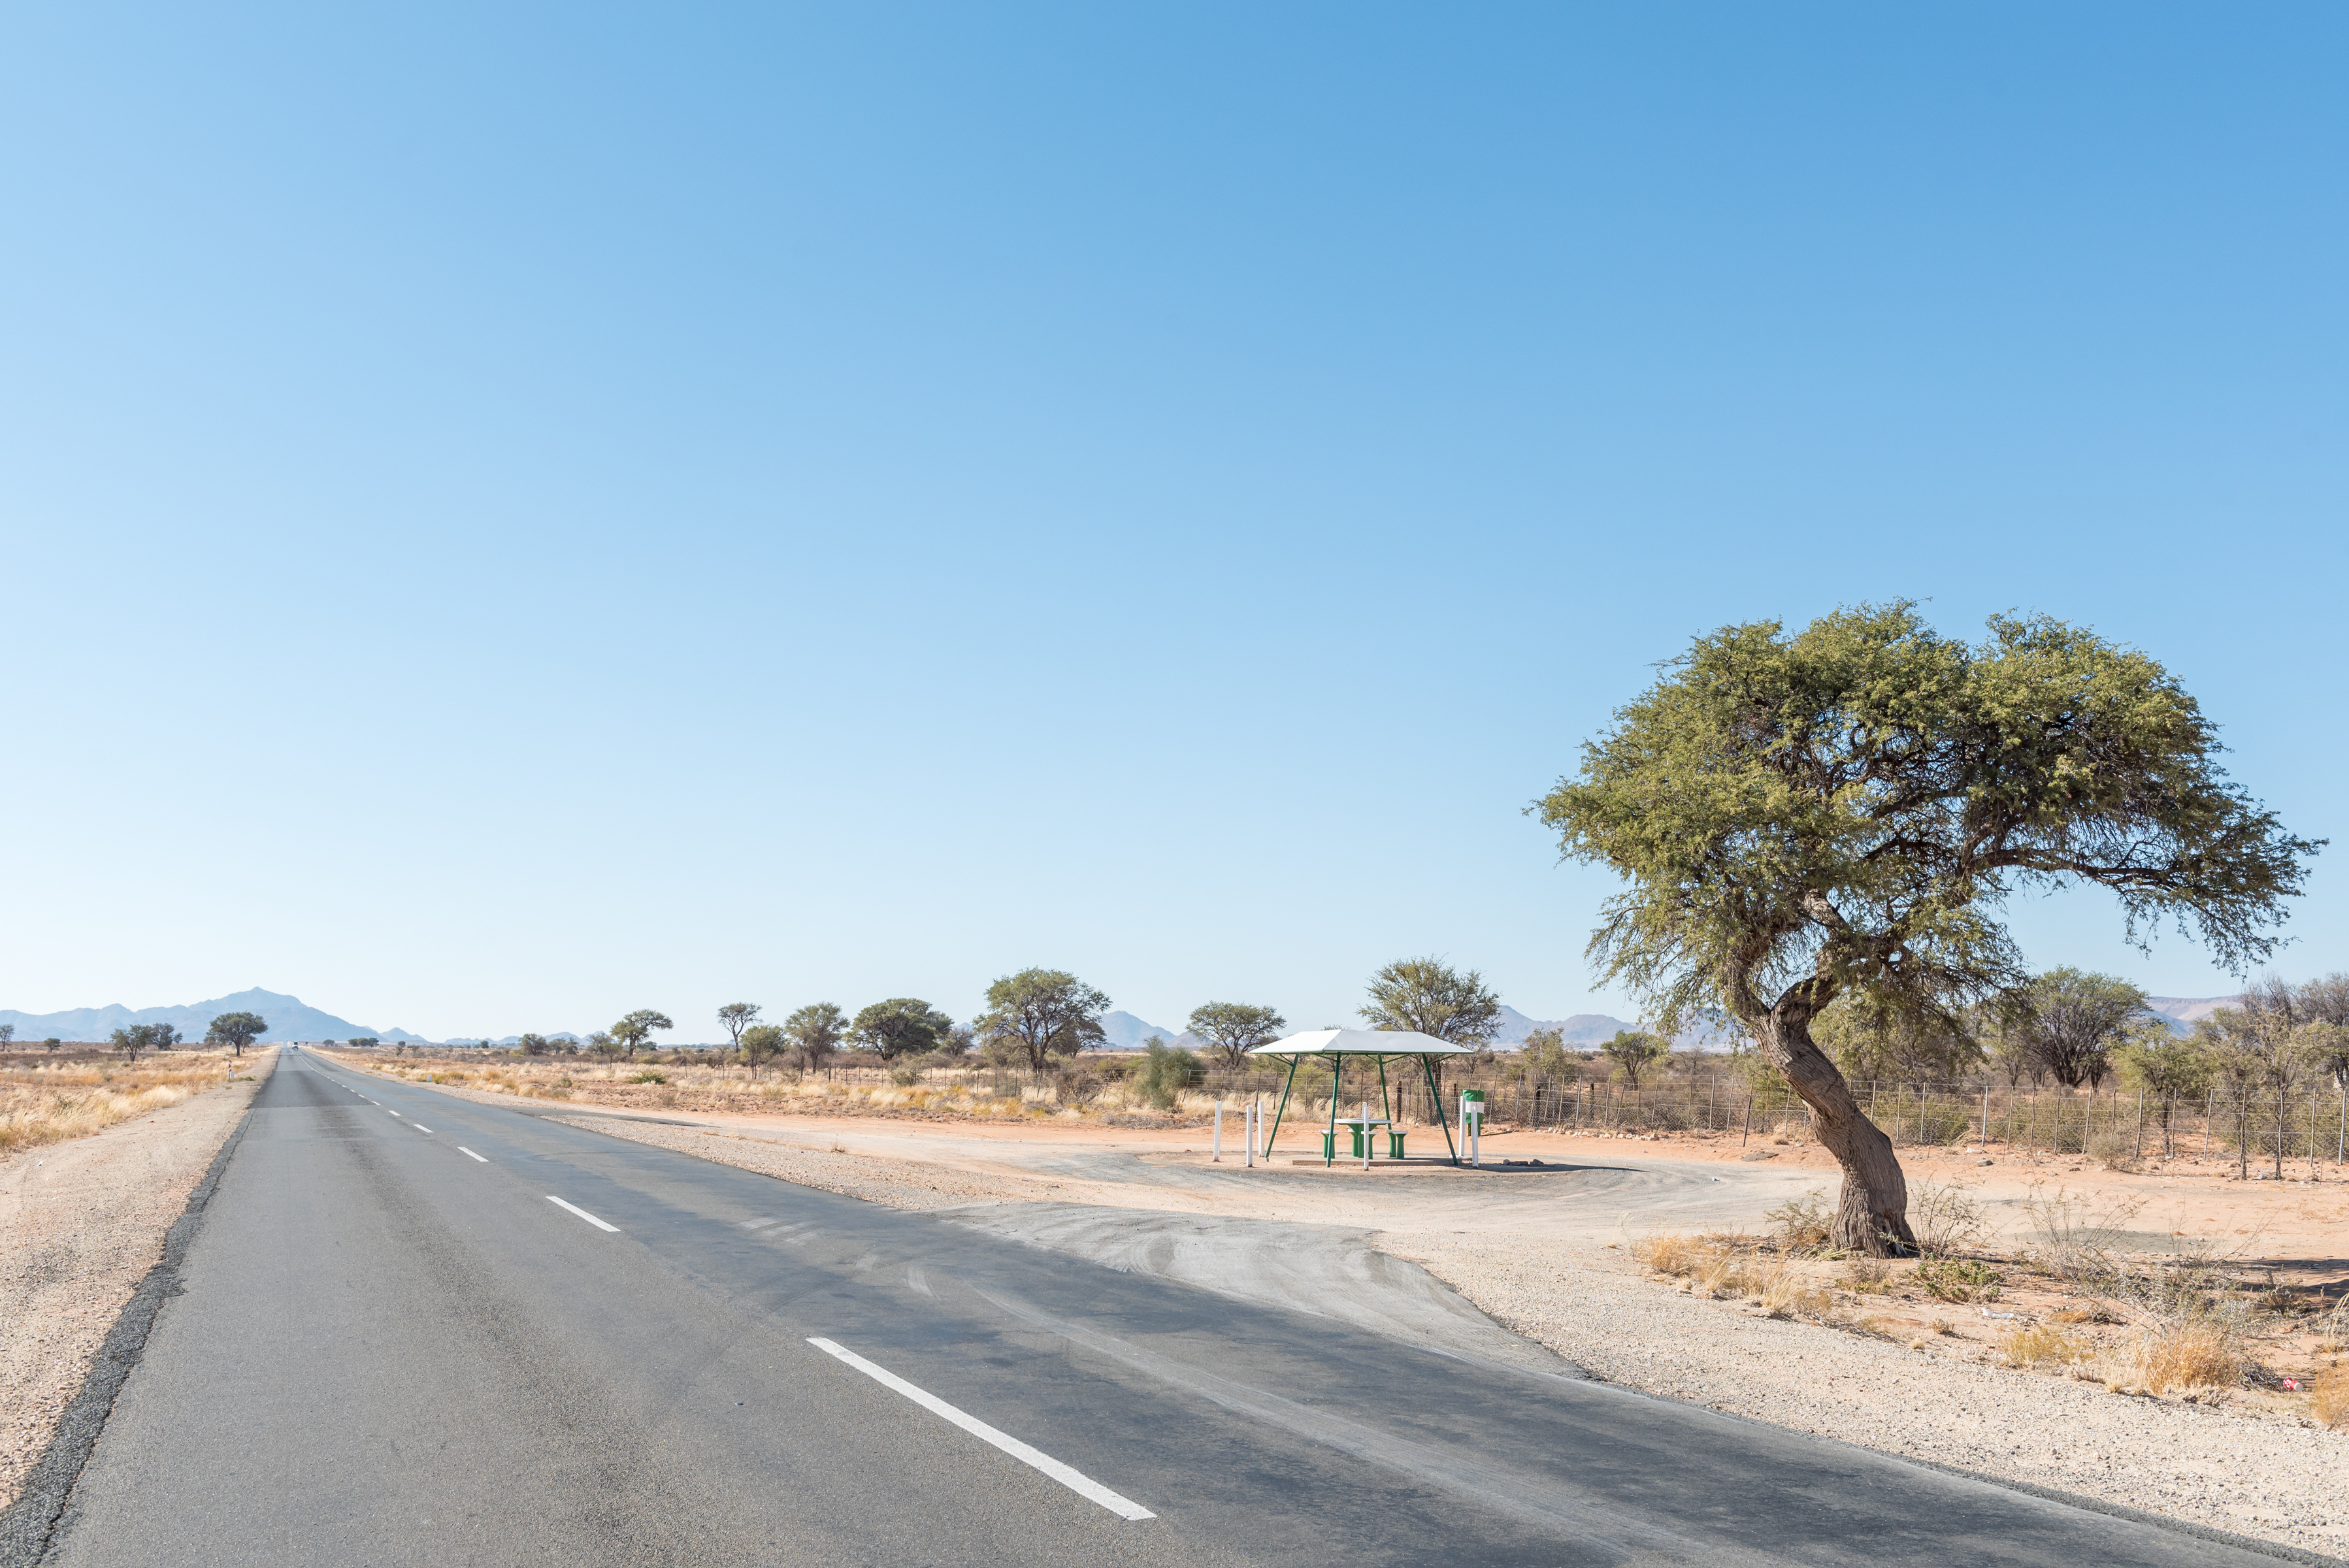 B1 Road in Namibia